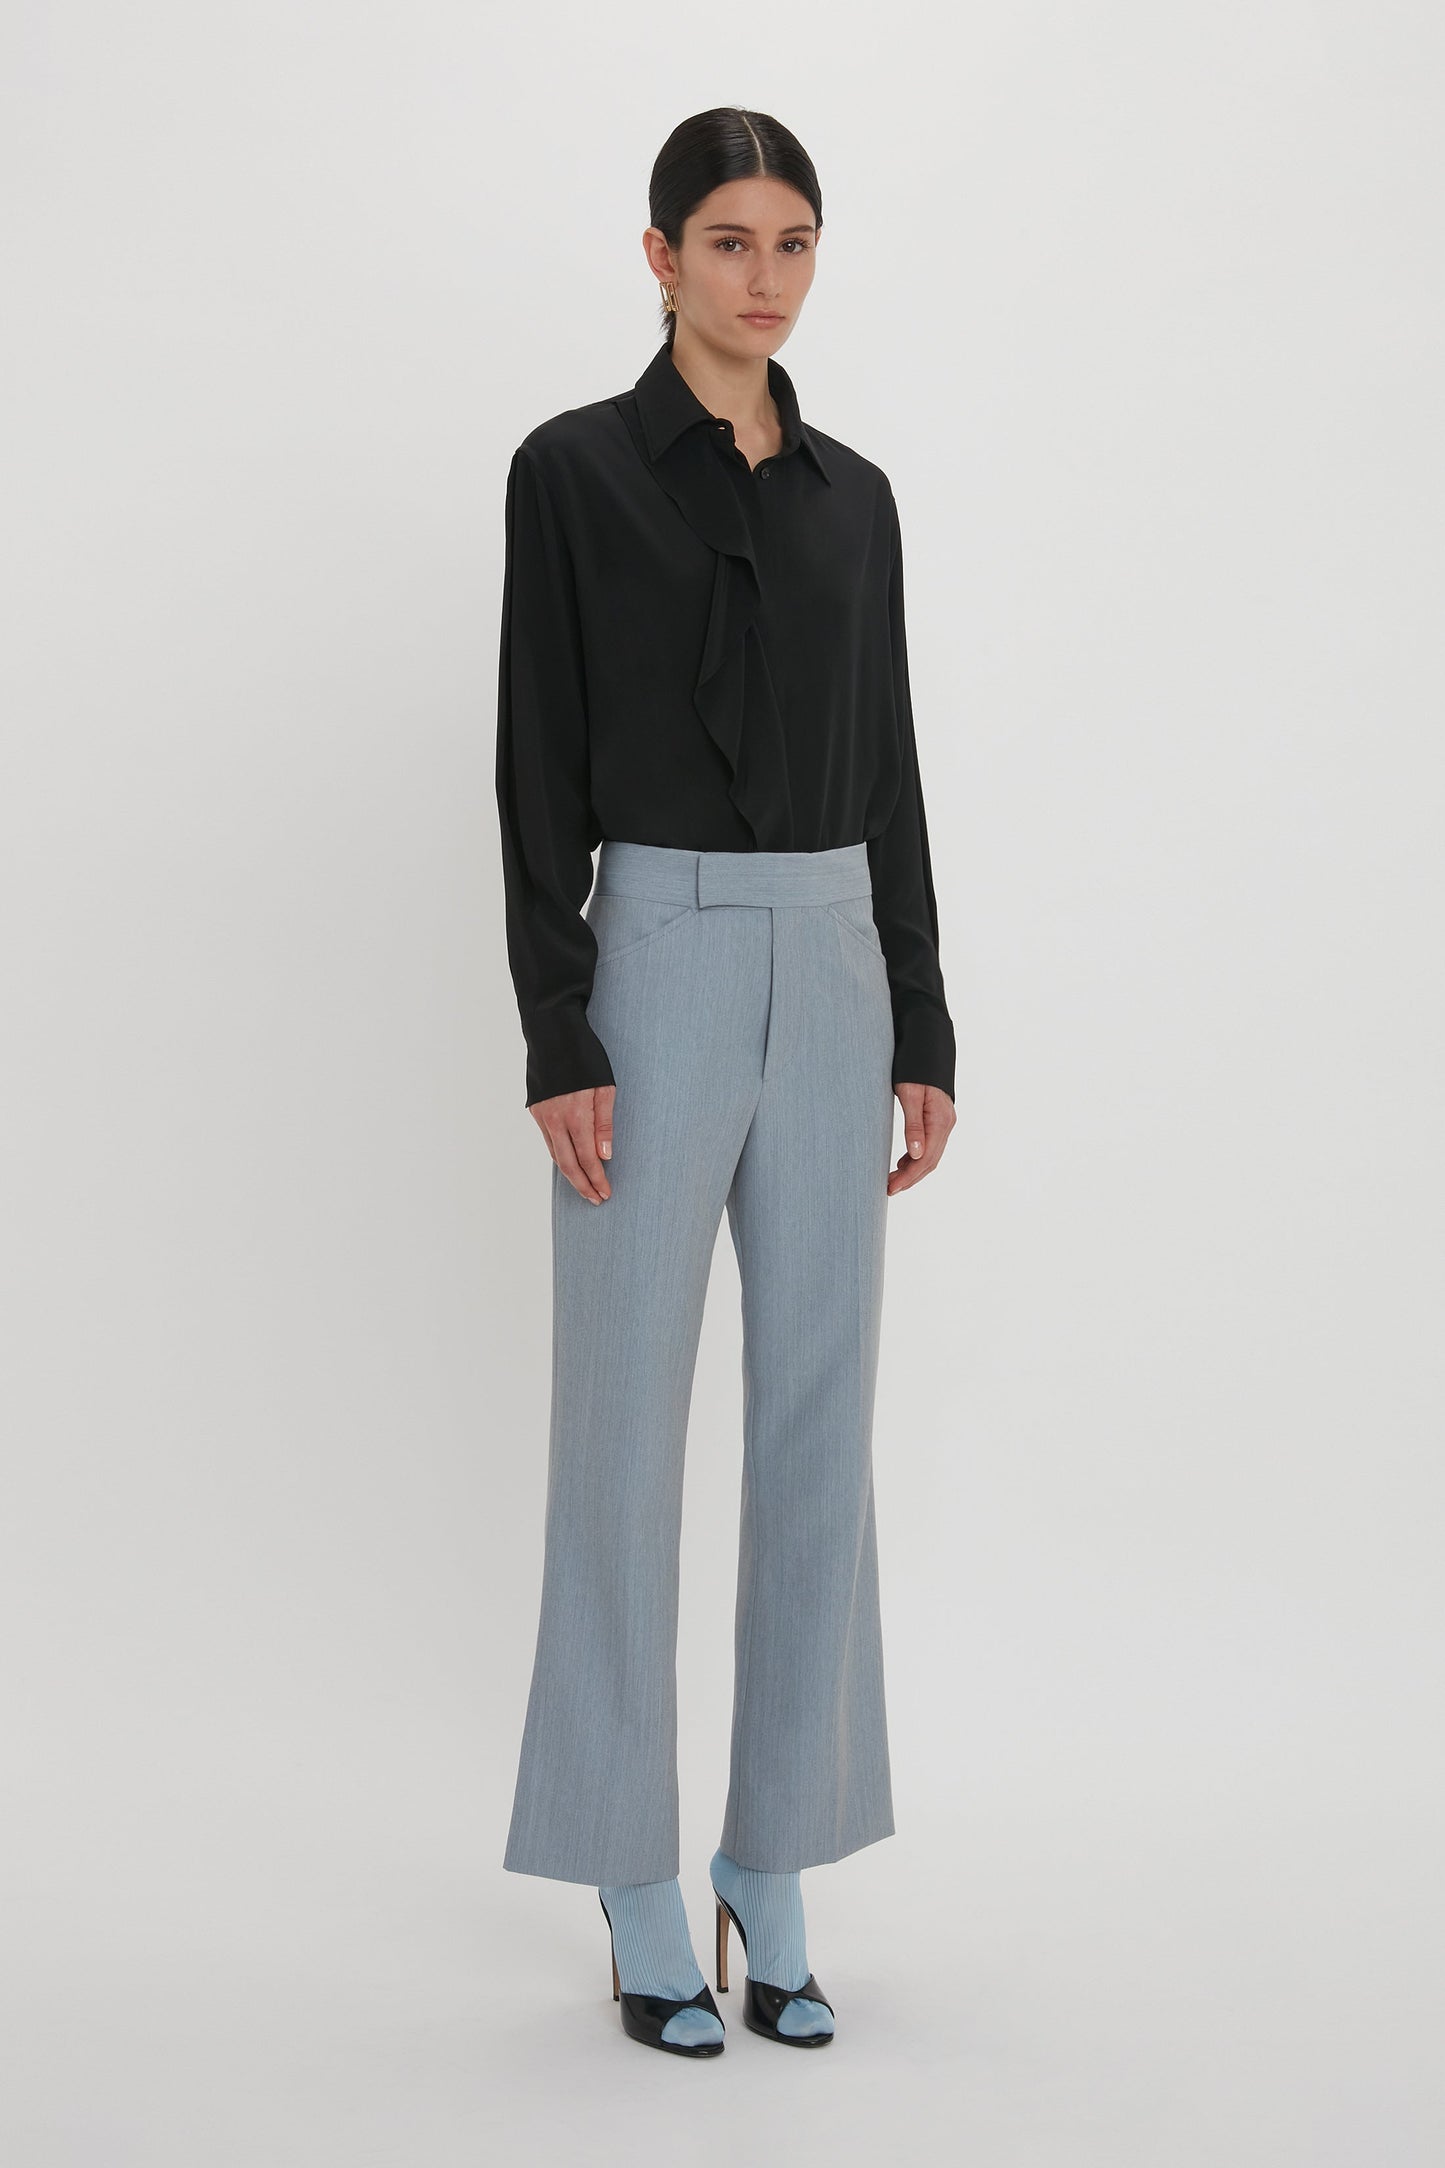 A person with dark hair is wearing a black blouse, Exclusive Wide Cropped Flare Trouser In Marina by Victoria Beckham, and blue high-heeled shoes. They are standing against a plain white background.